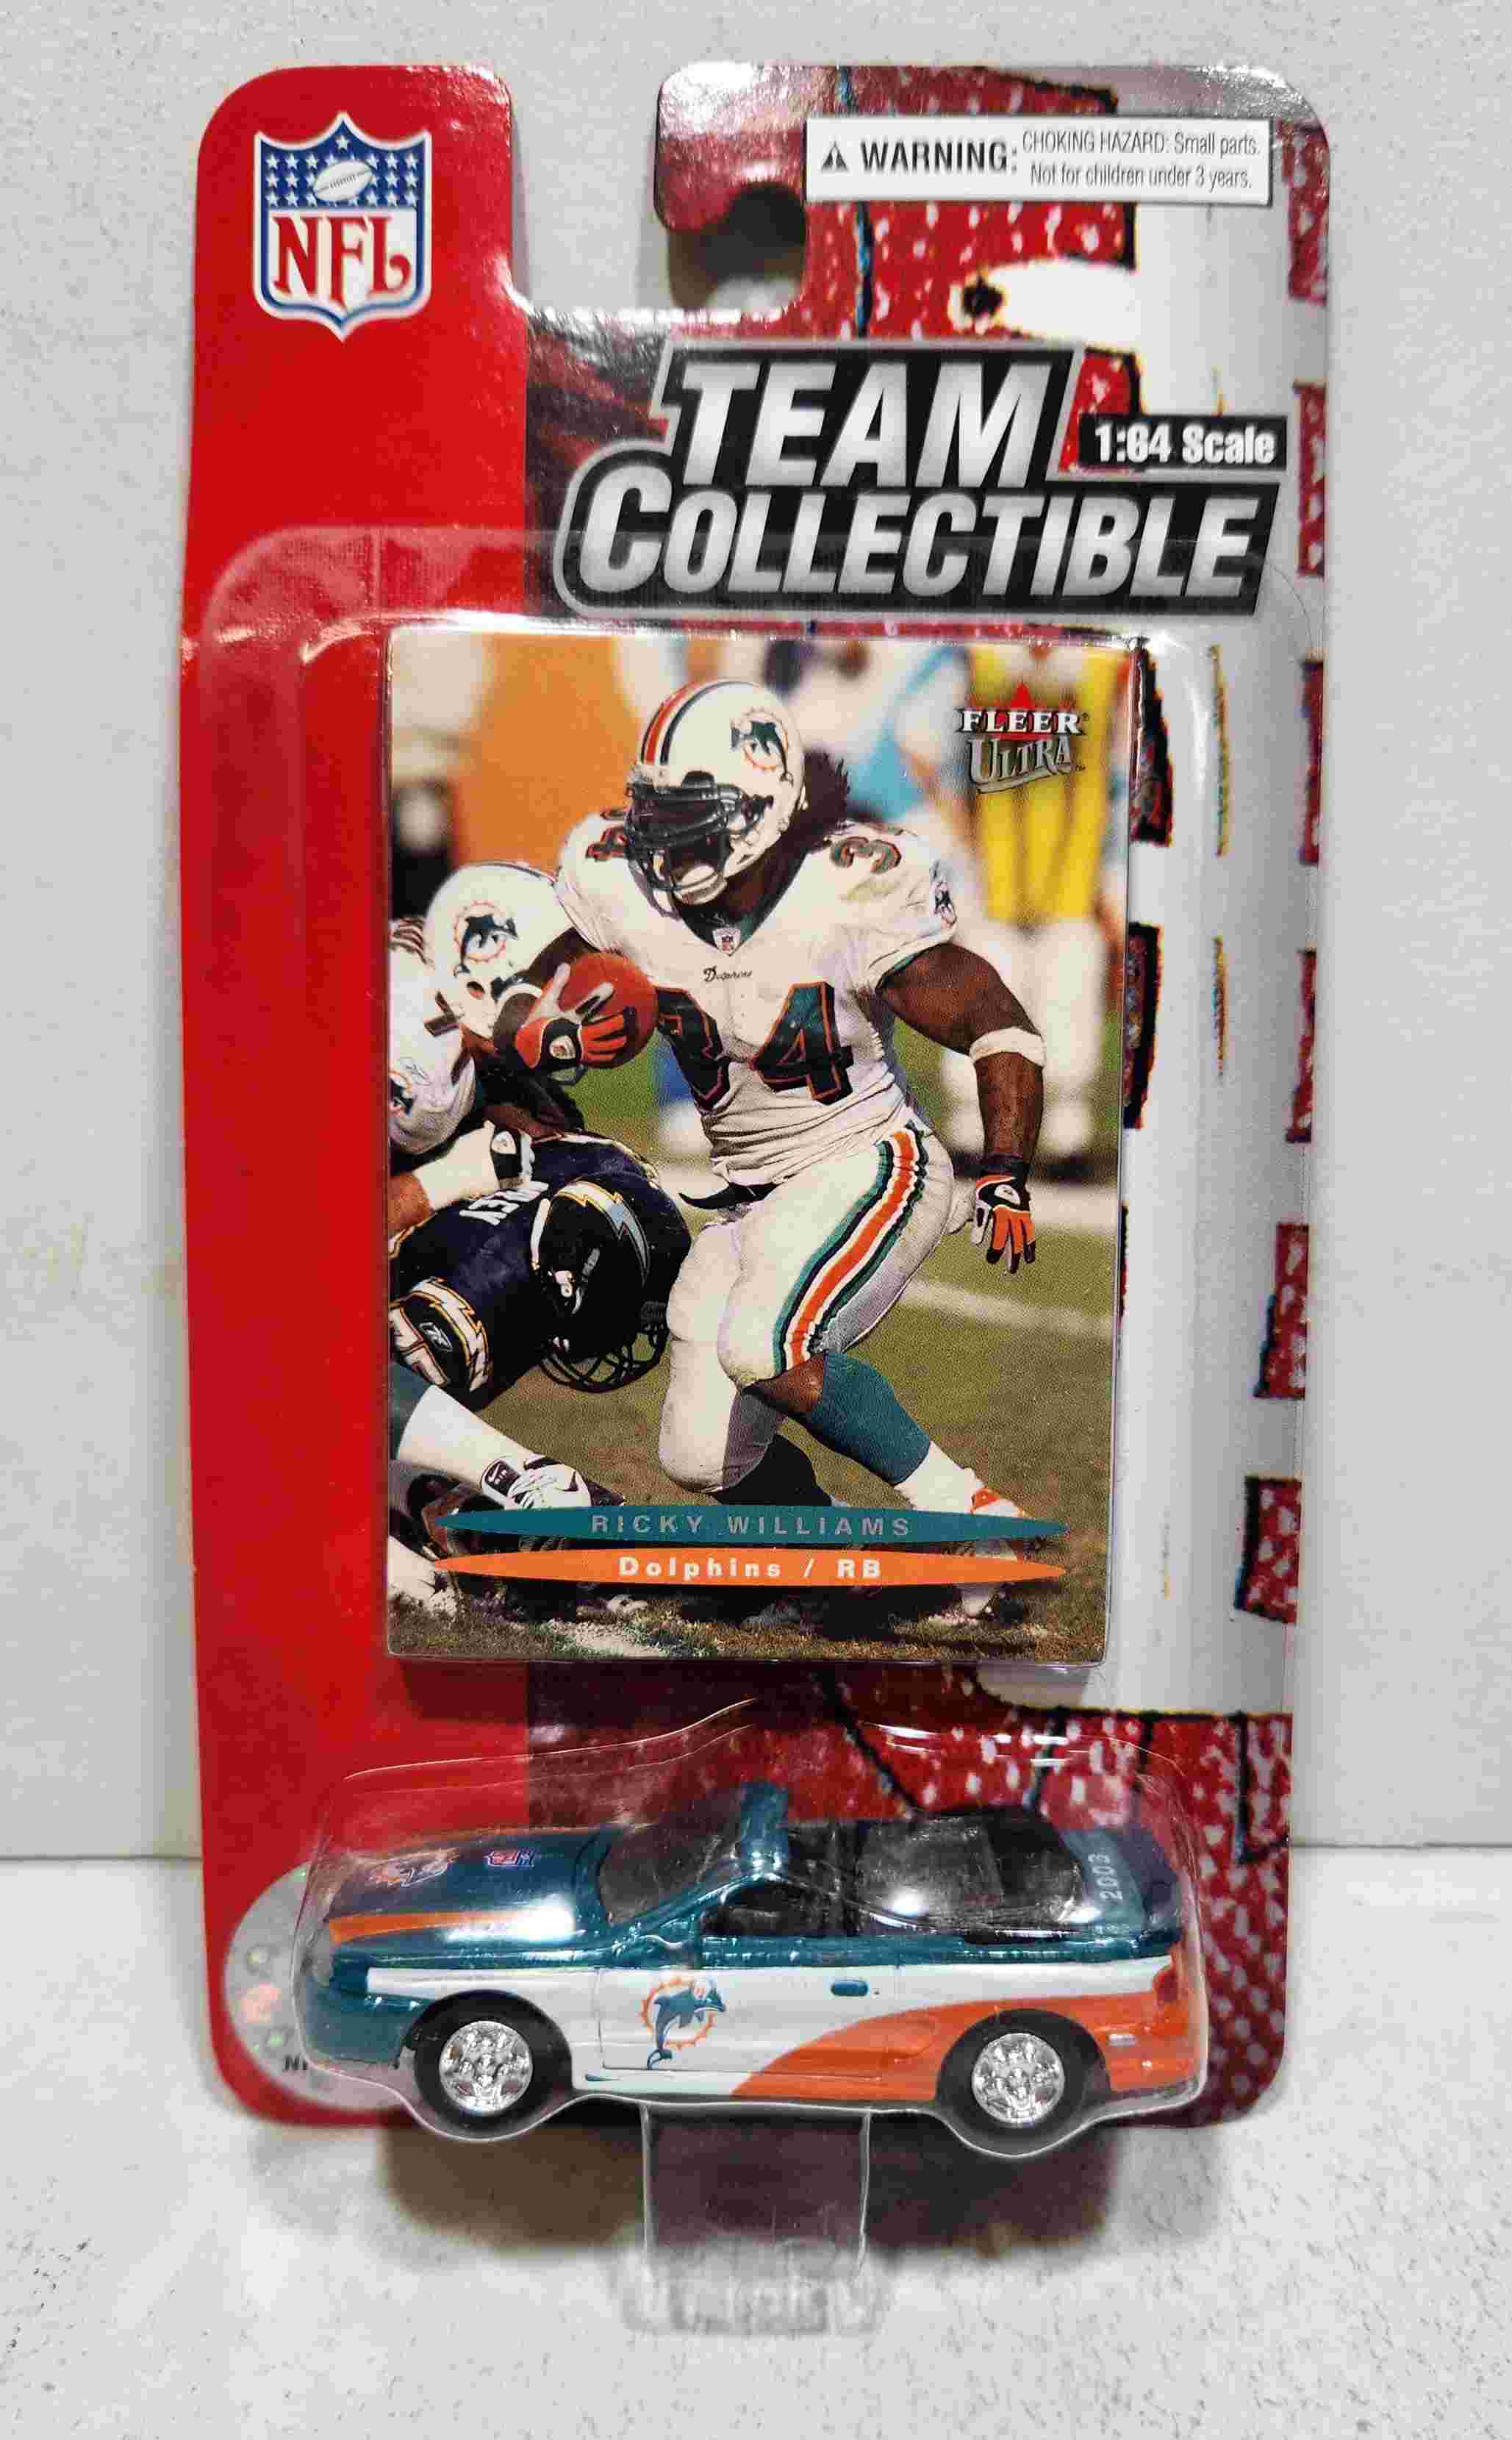 2003 Miami Dolphins 1/64th Mustang with Ricky Williams trading card